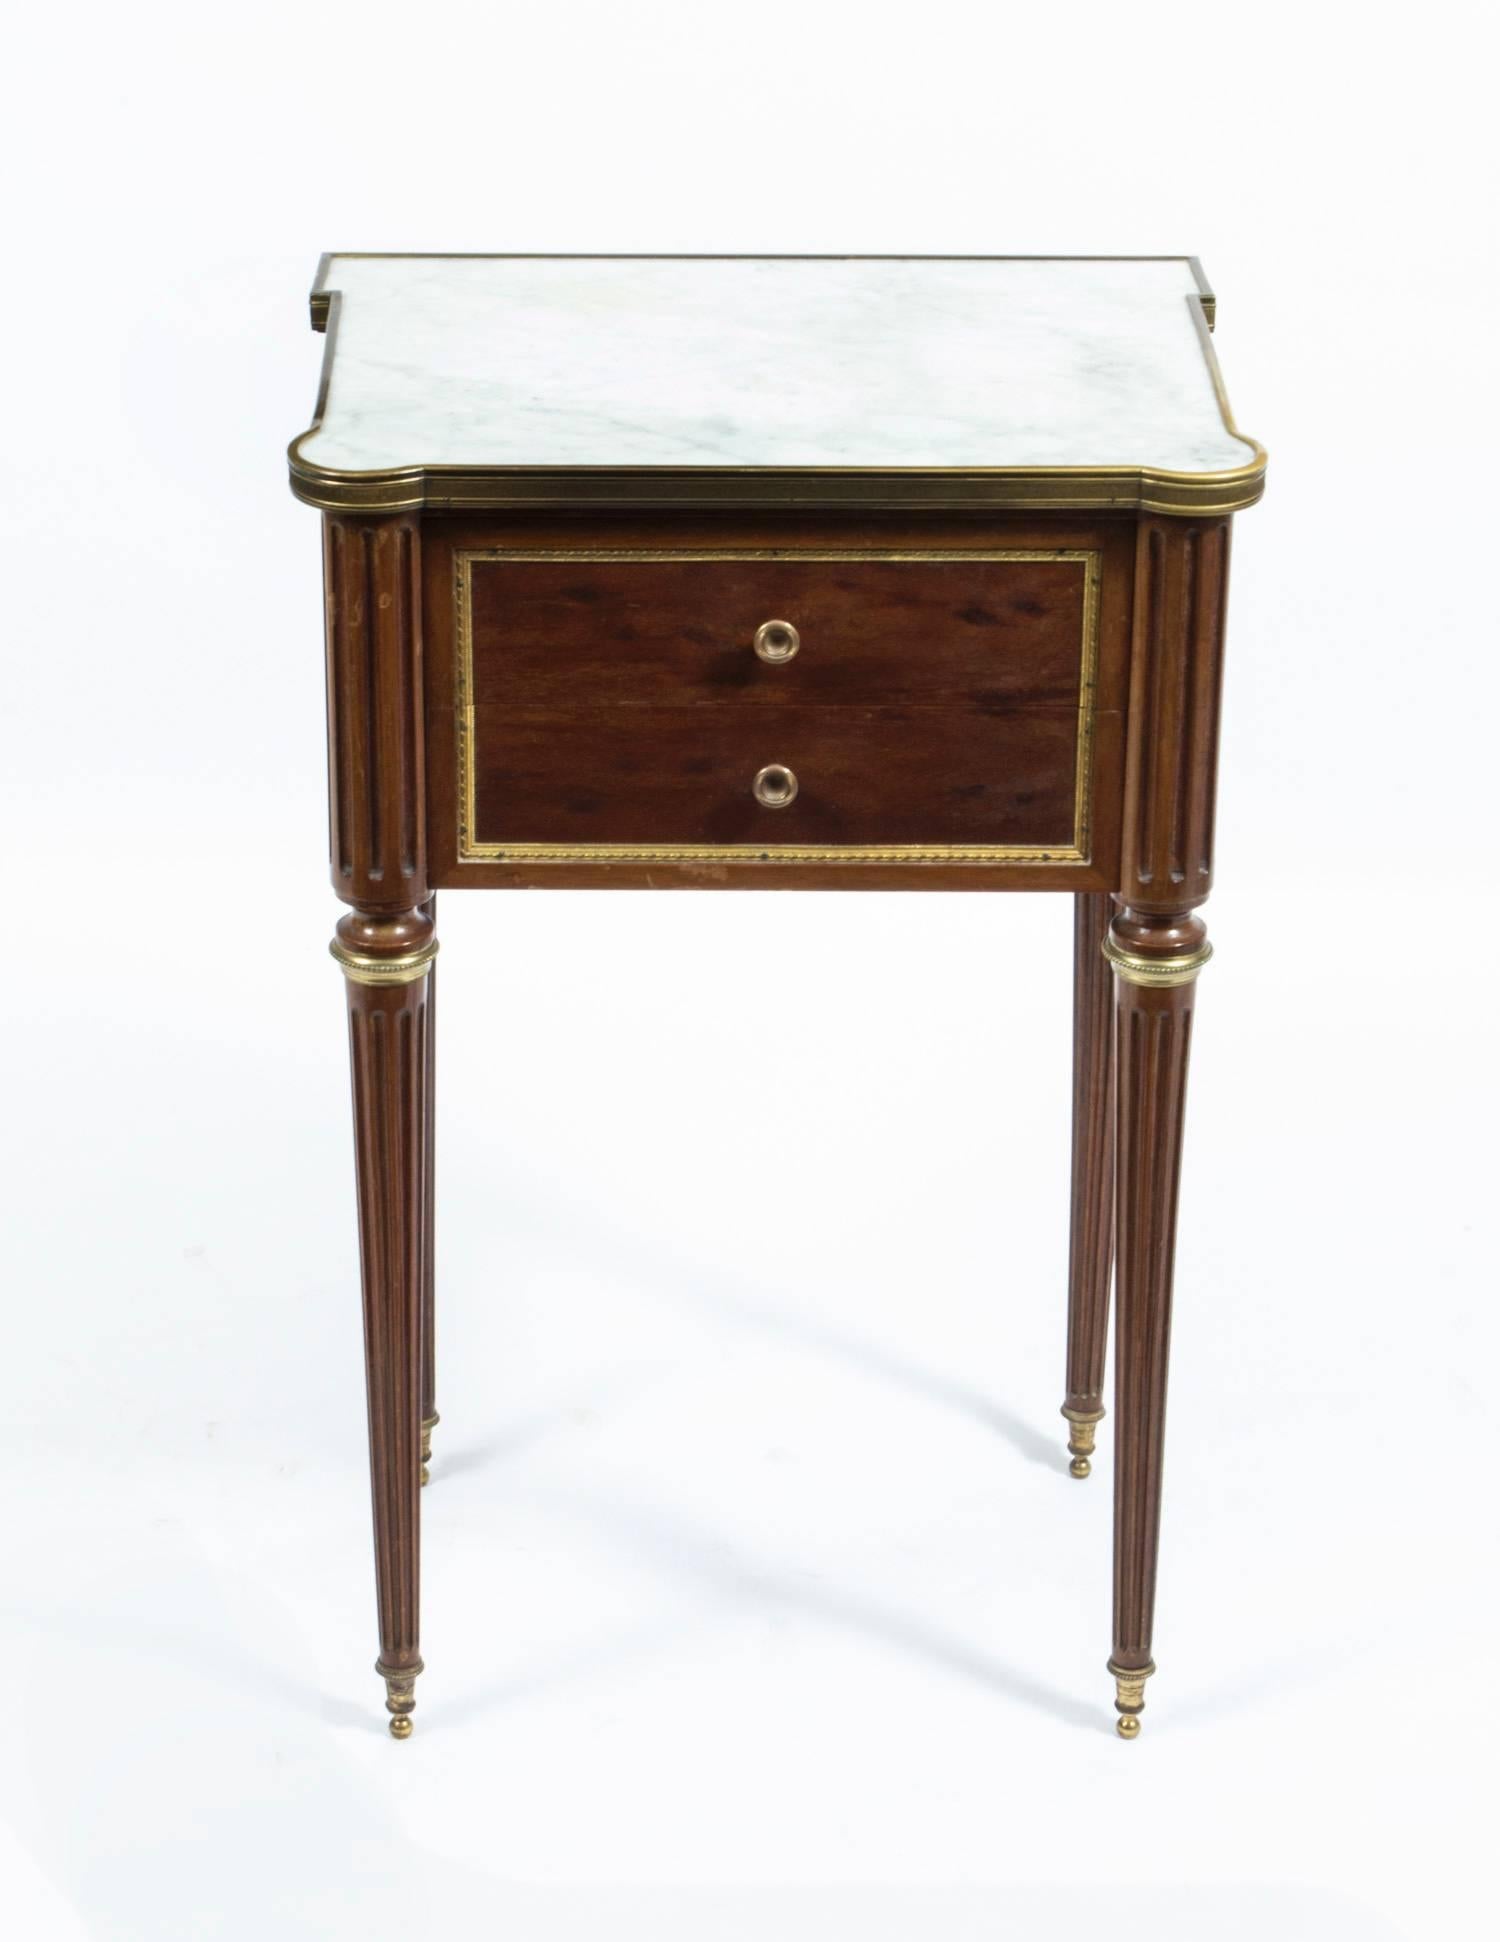 Early 20th Century Antique Pair French Empire Style Bedside Cabinets, circa 1900